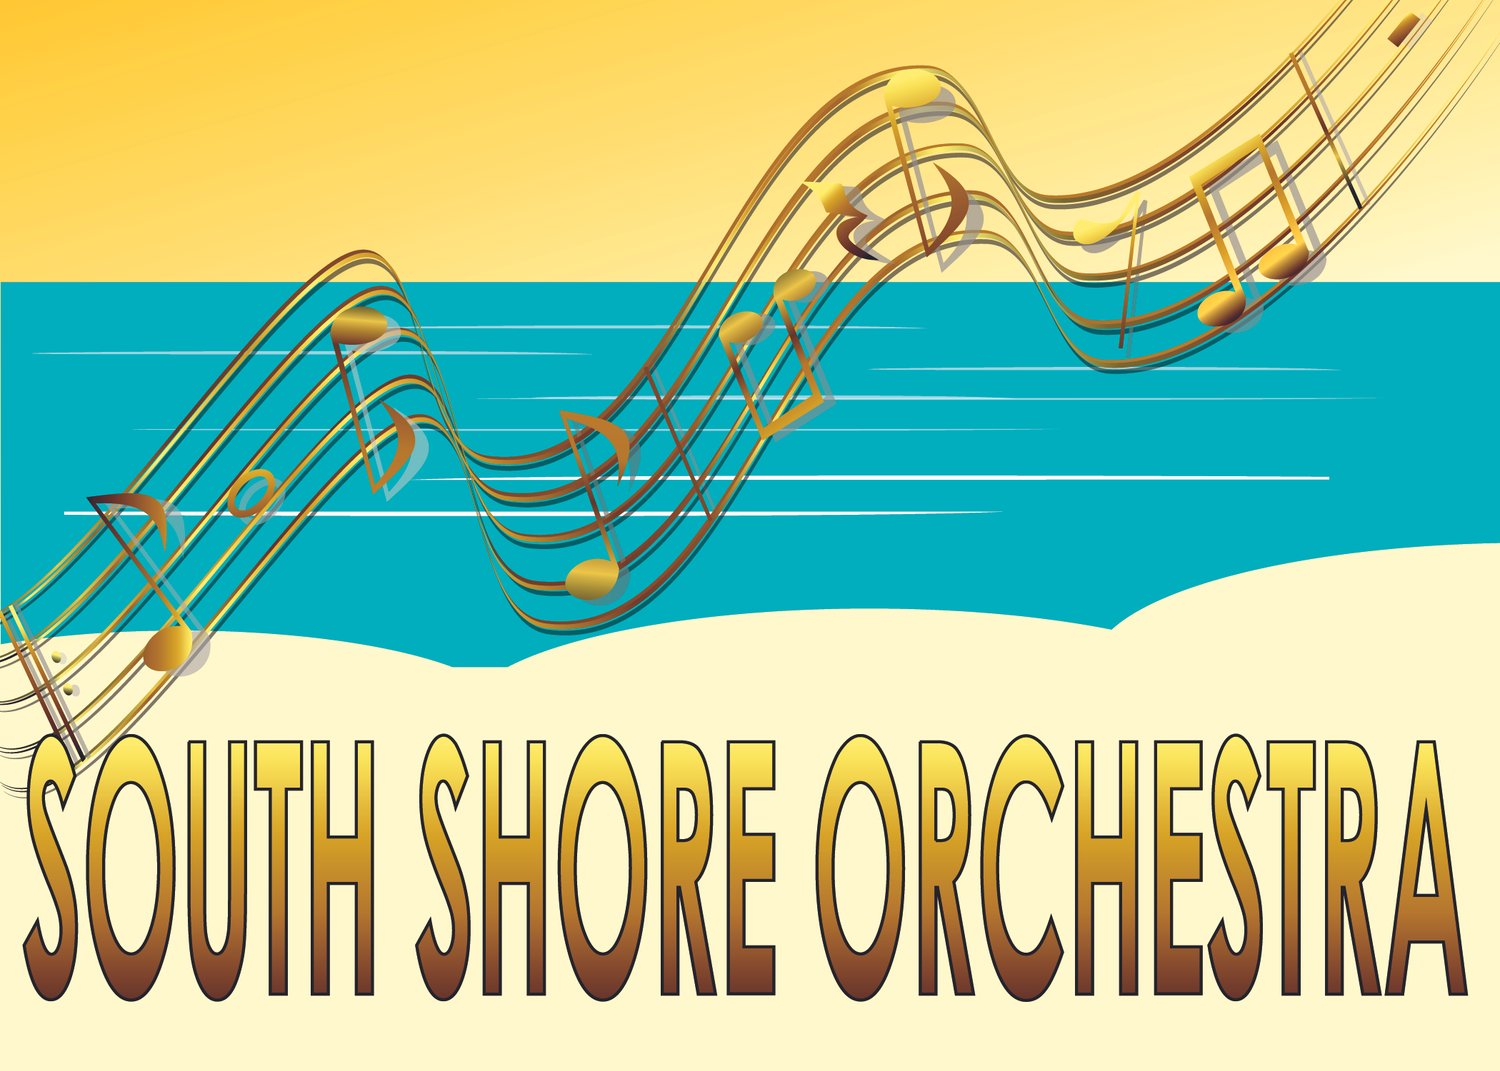 SOUTH SHORE ORCHESTRA 